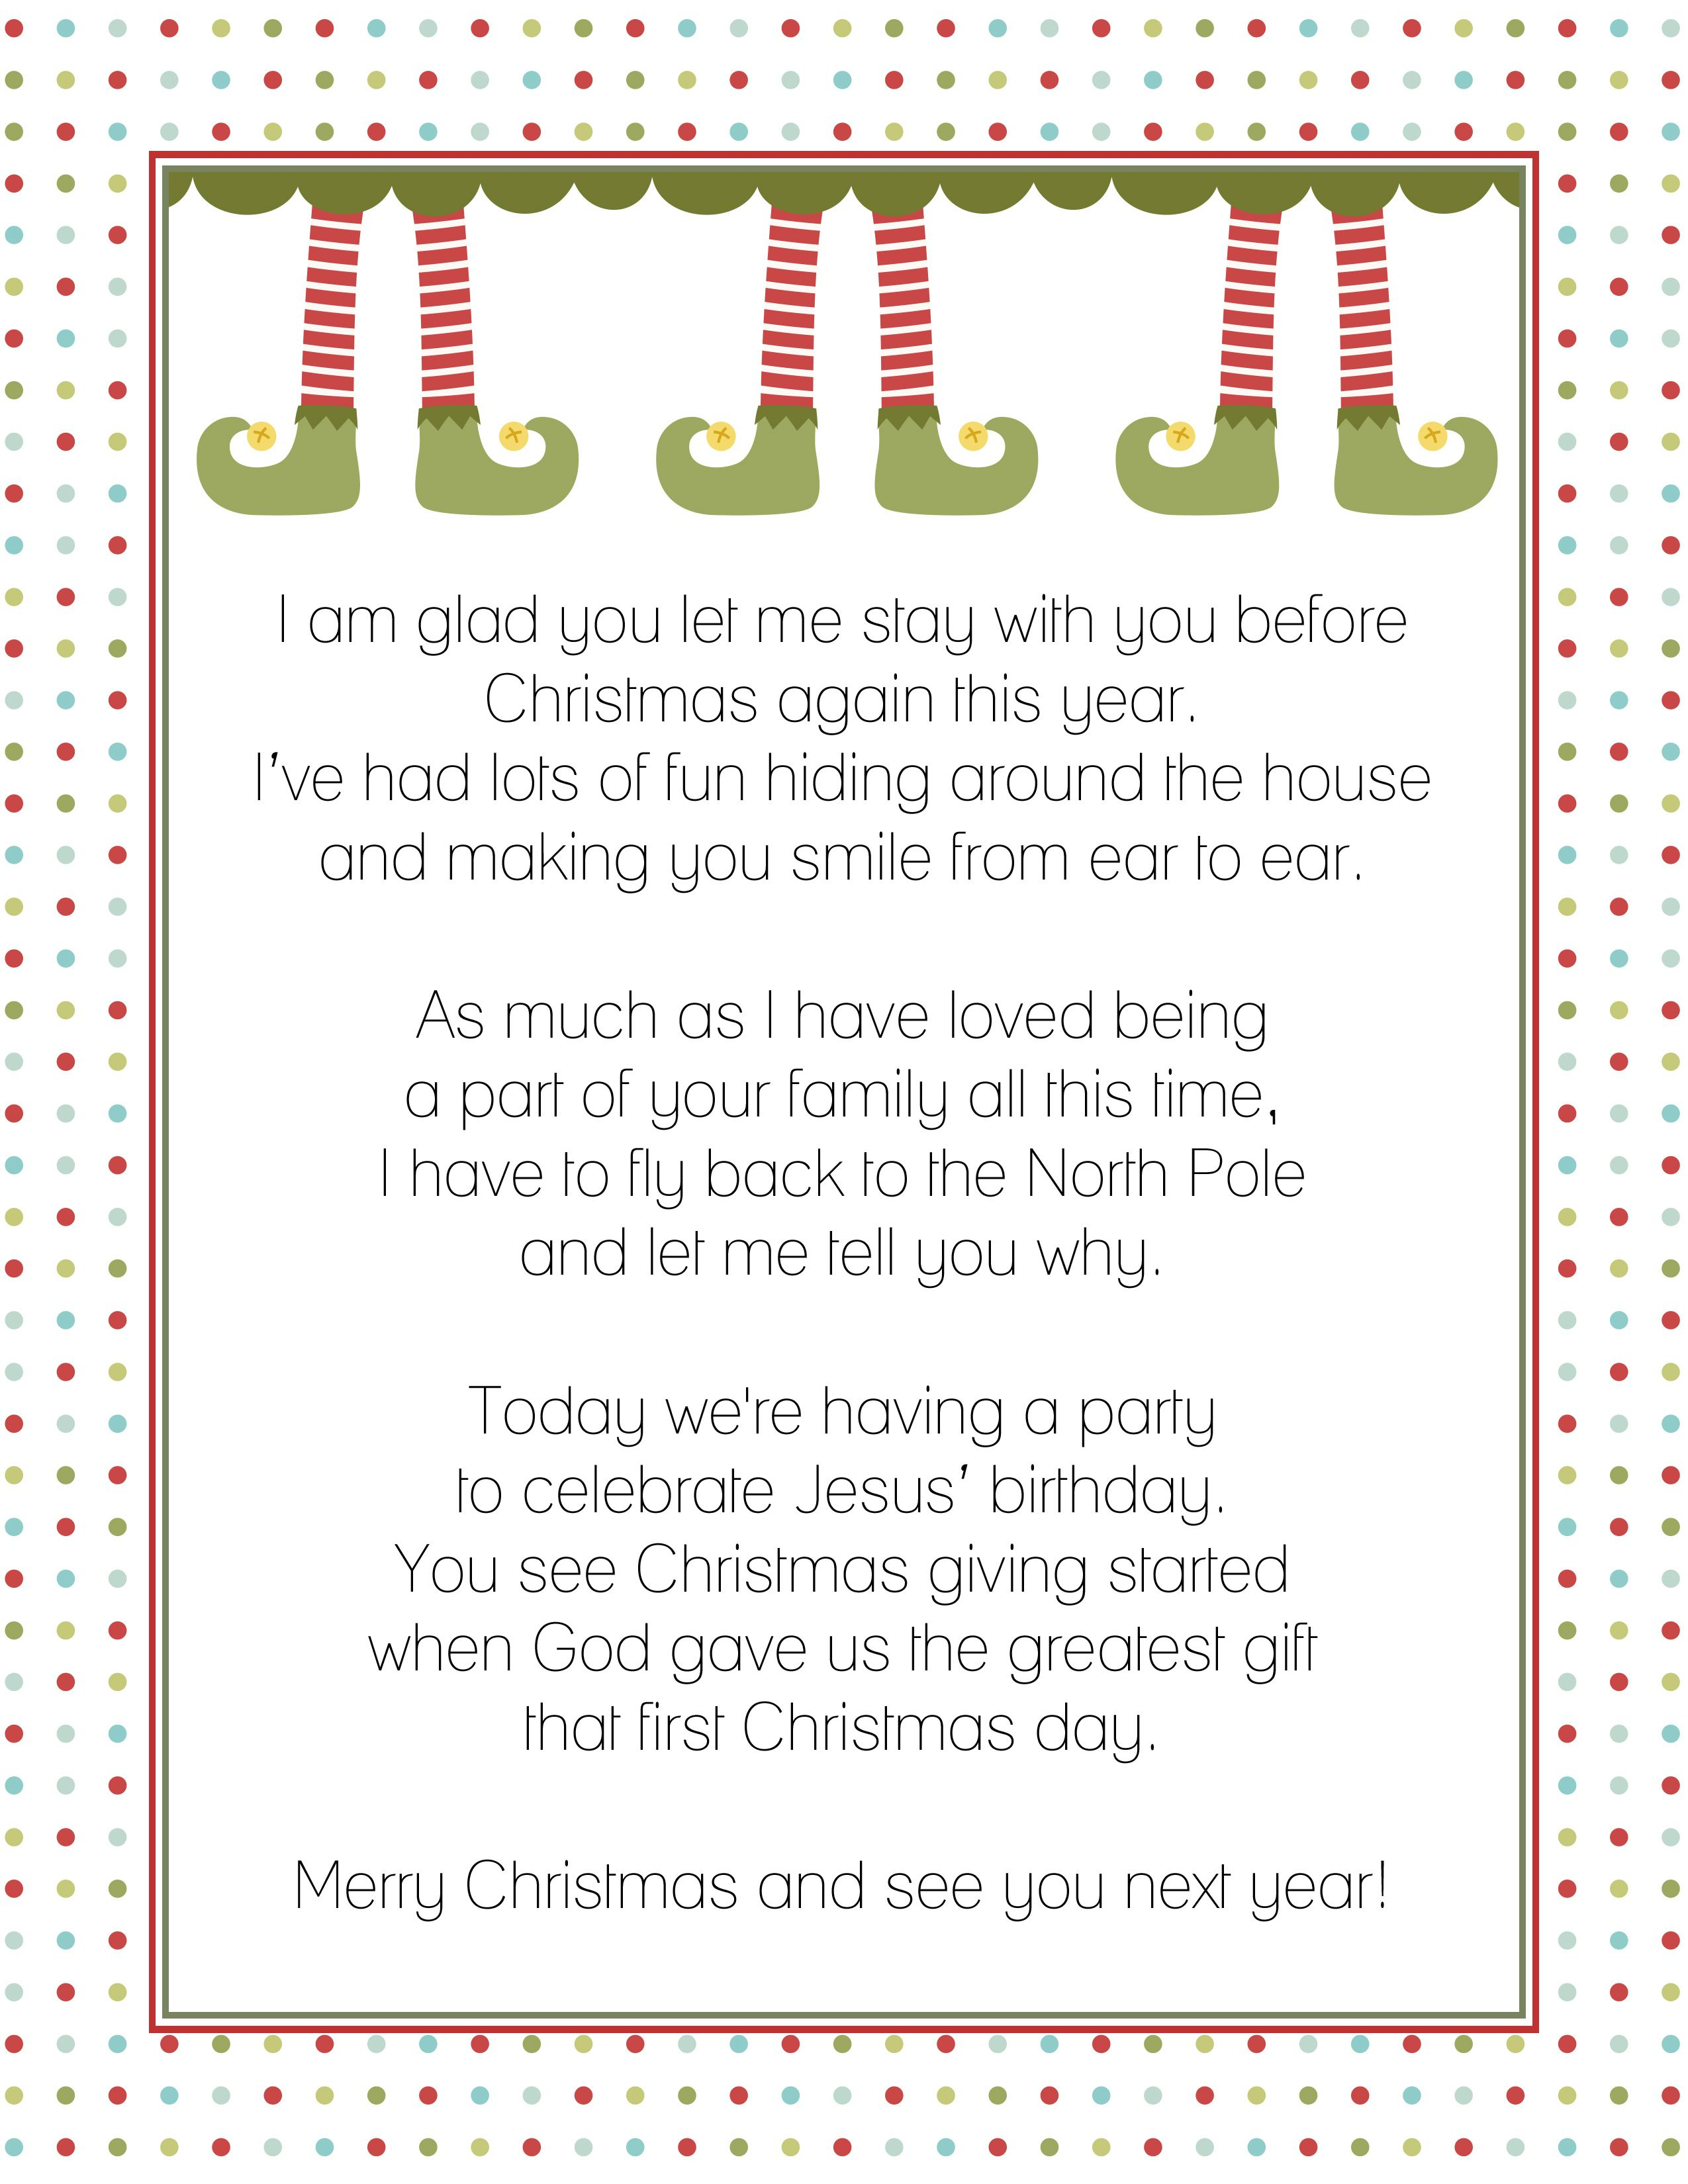 Goodbye Letter From The Elf On A Shelf | Christmas! | Pinterest - Elf On The Shelf Goodbye Letter Free Printable